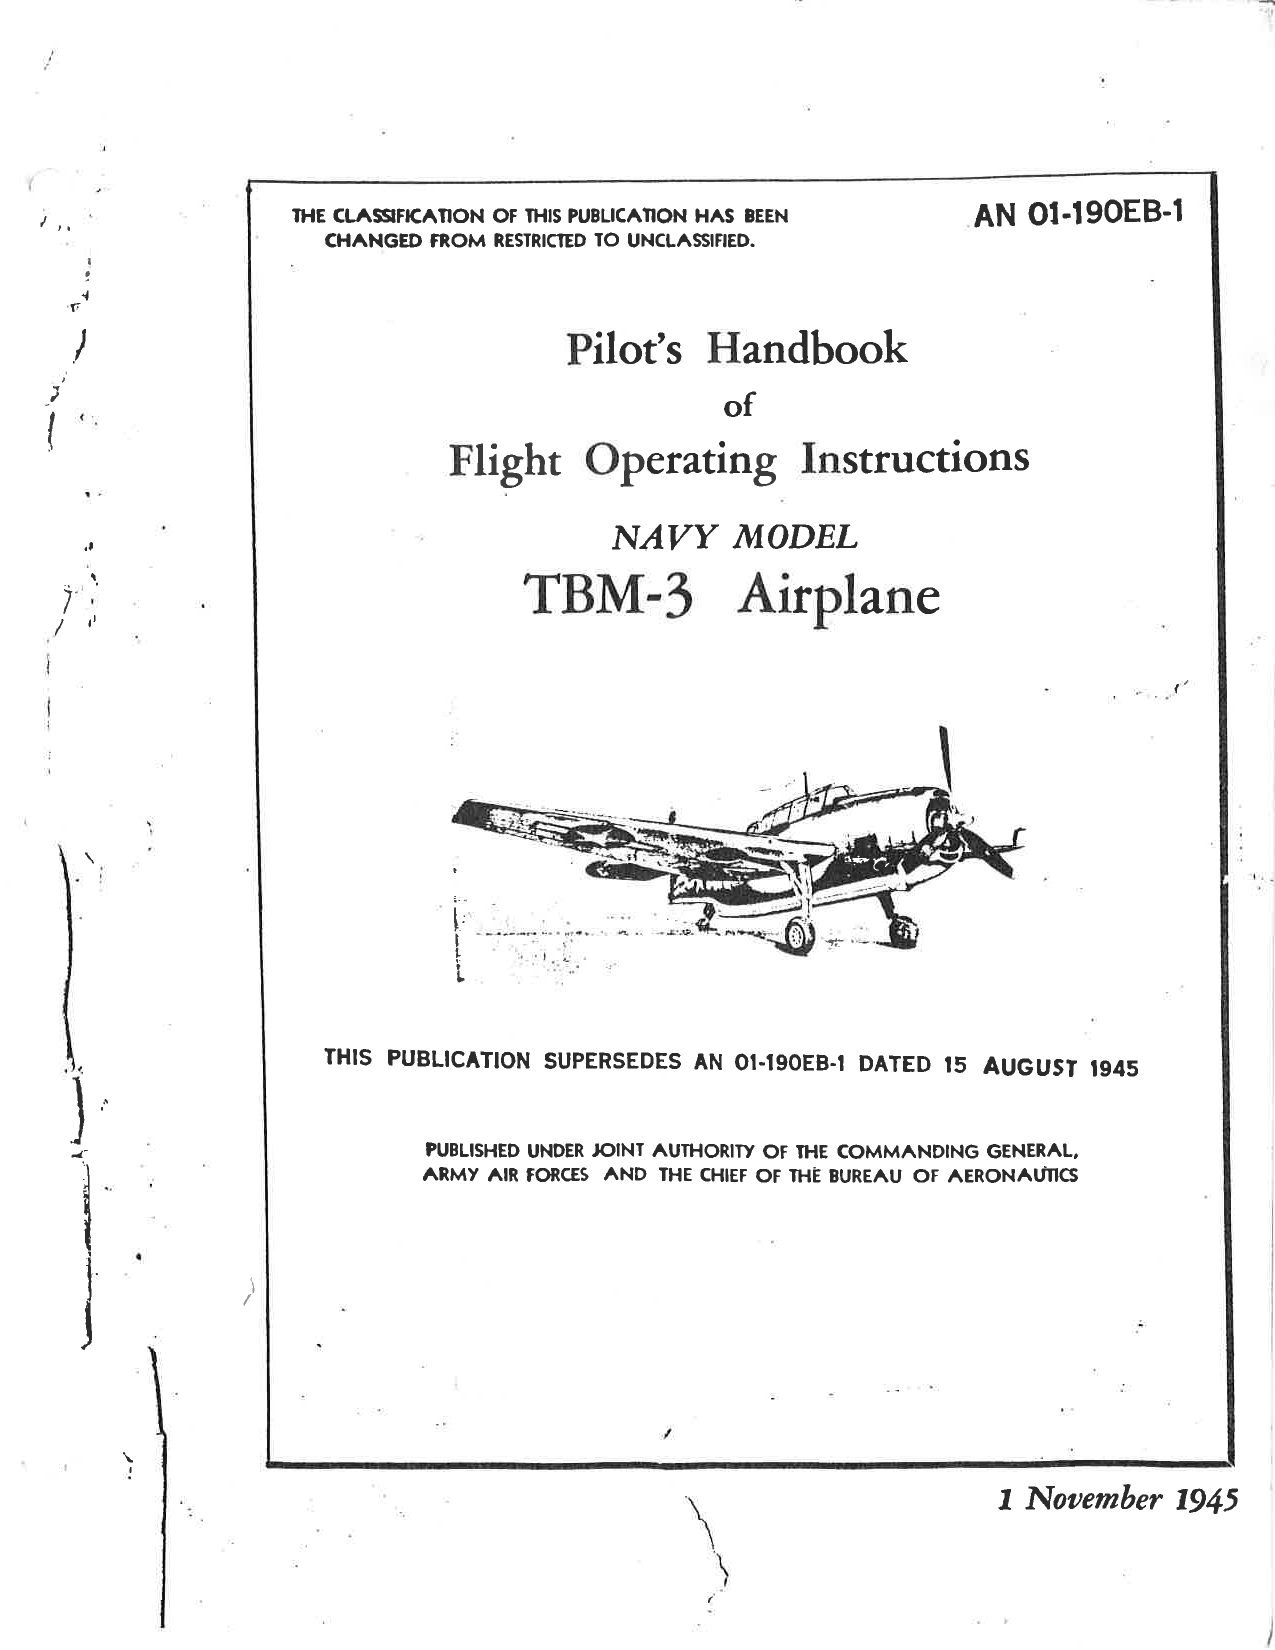 Sample page 1 from AirCorps Library document: Pilot's Handbook - TBM-3